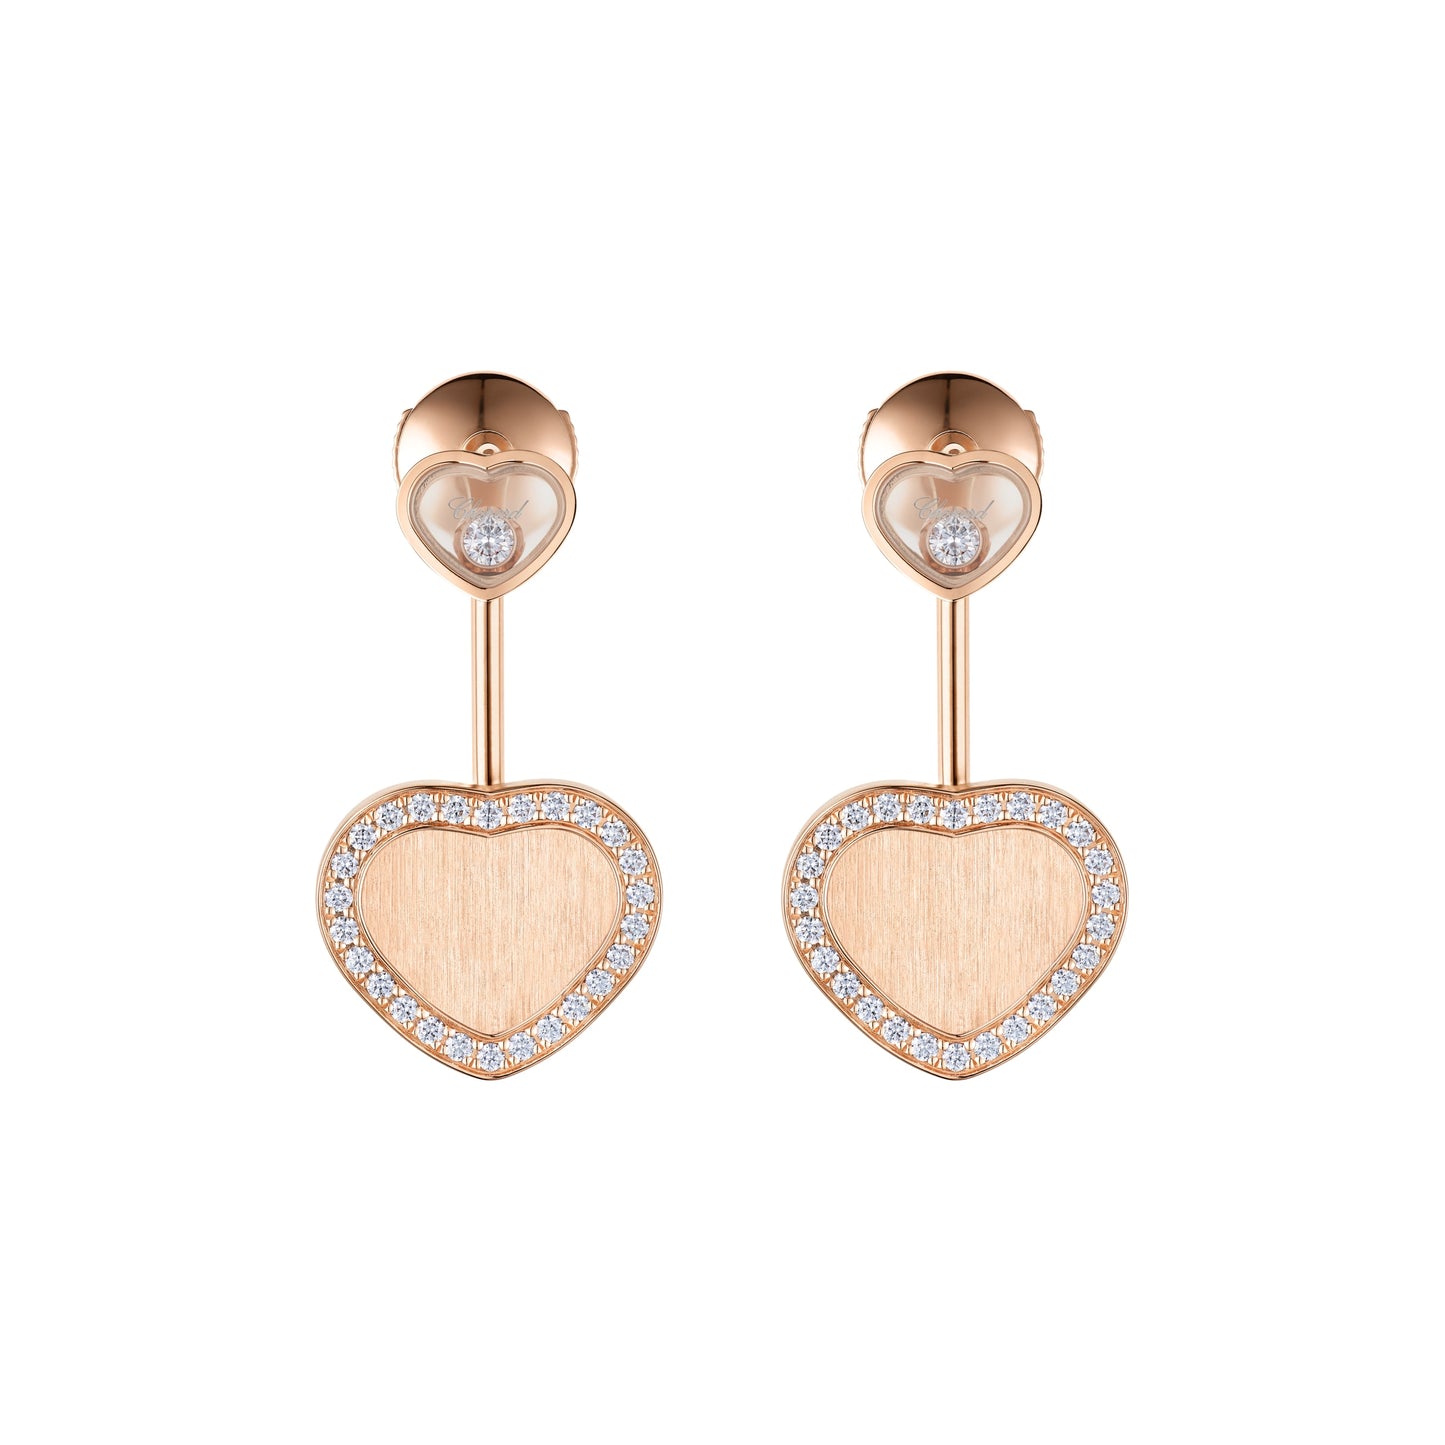 HAPPY HEARTS GOLDEN HEARTS EARRINGS, ETHICAL ROSE GOLD, DIAMONDS 83A007-5921